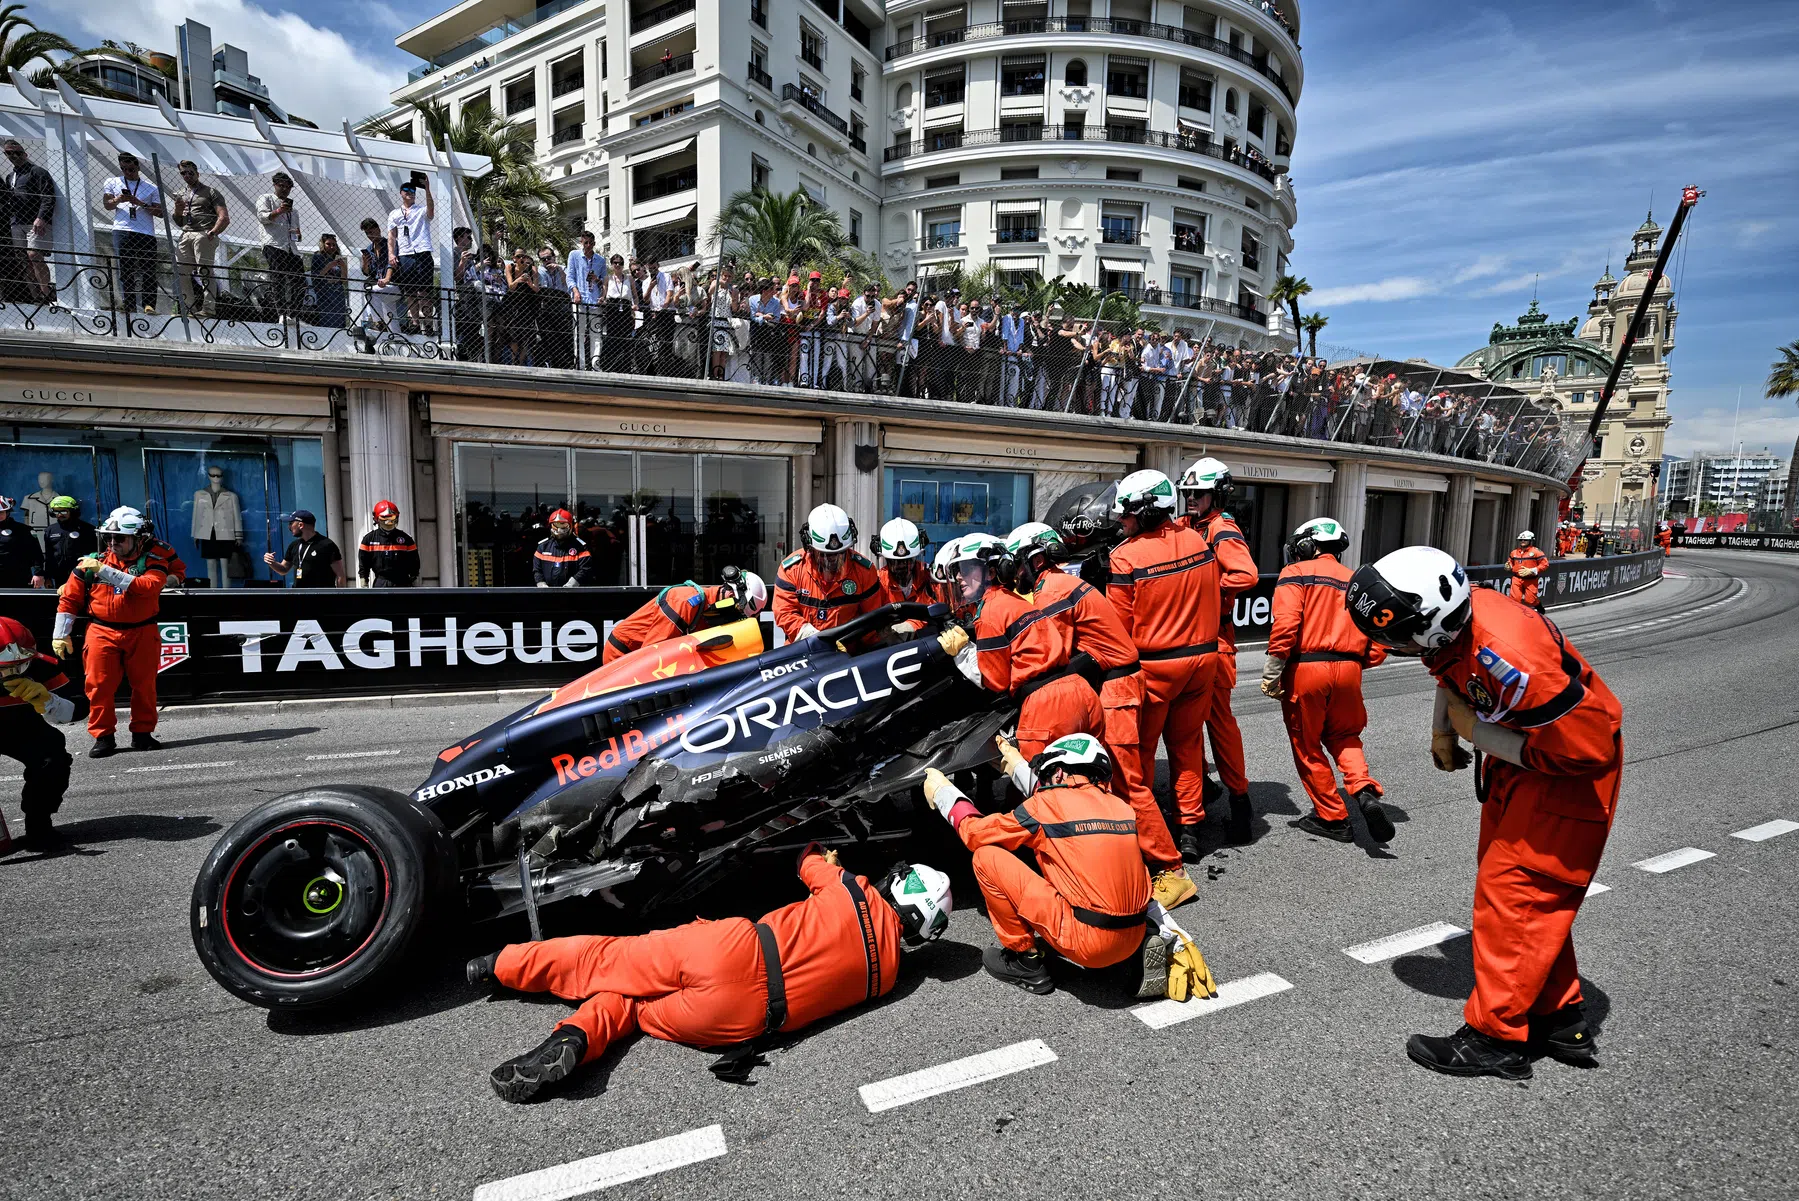 photographer to hospital after major crash in monaco